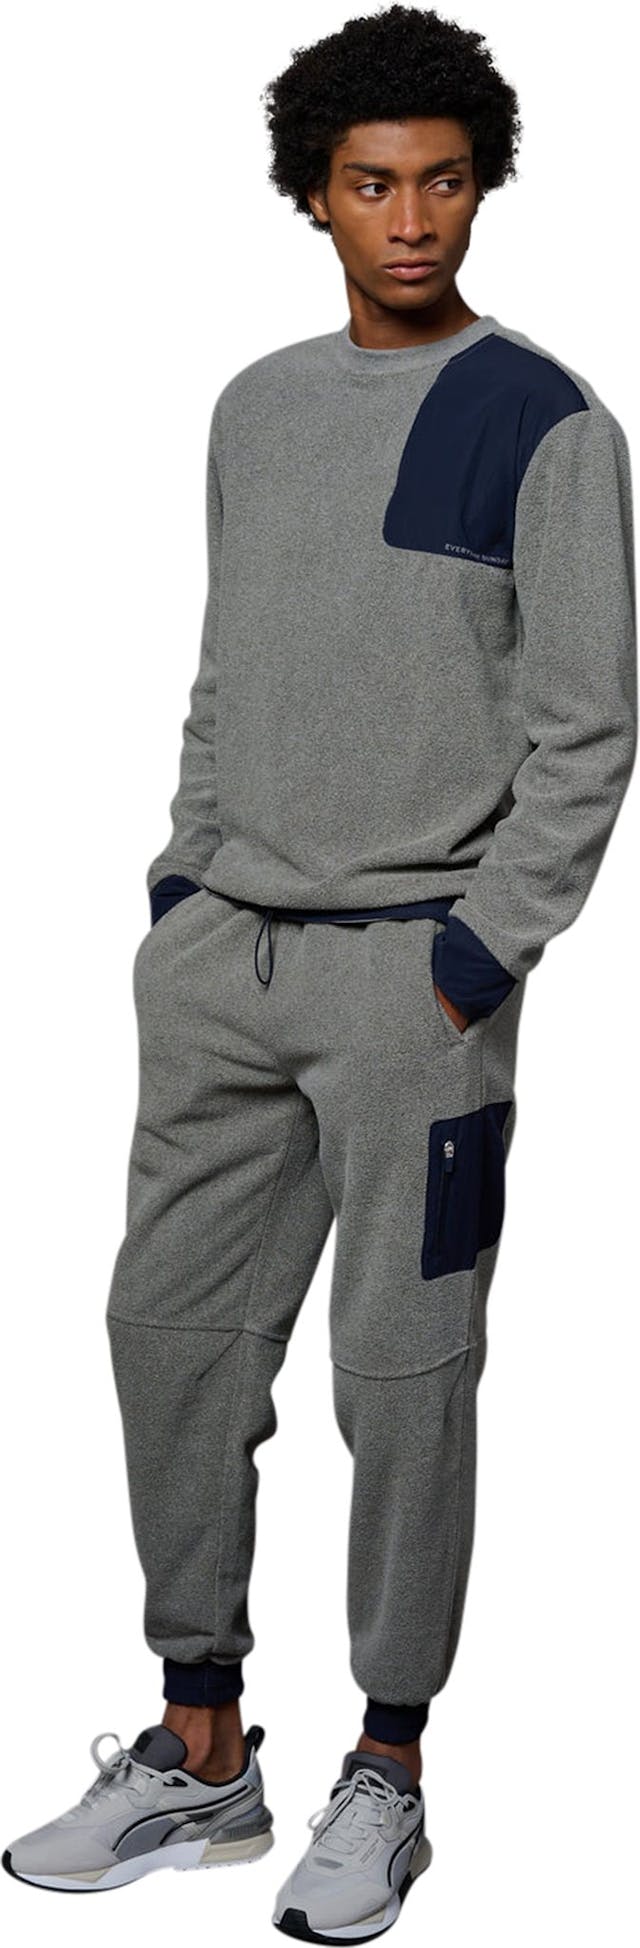 Product image for The Polar Pant - Men's